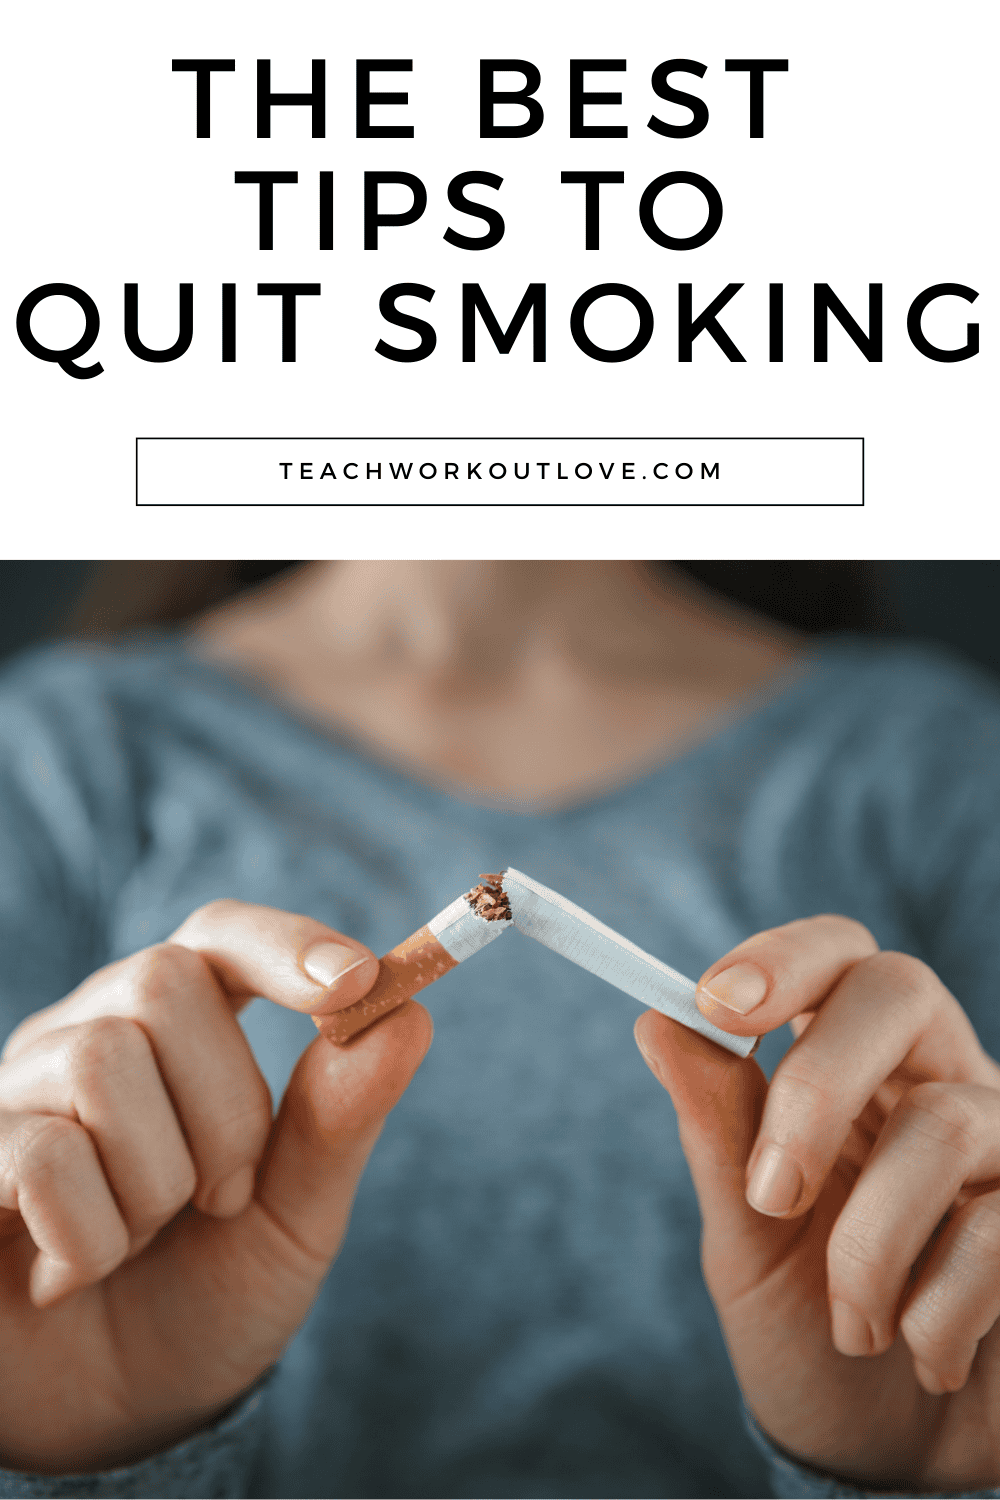 Quitting cigarettes is easier than you think, especially when you prepare properly, using some of our tips below.